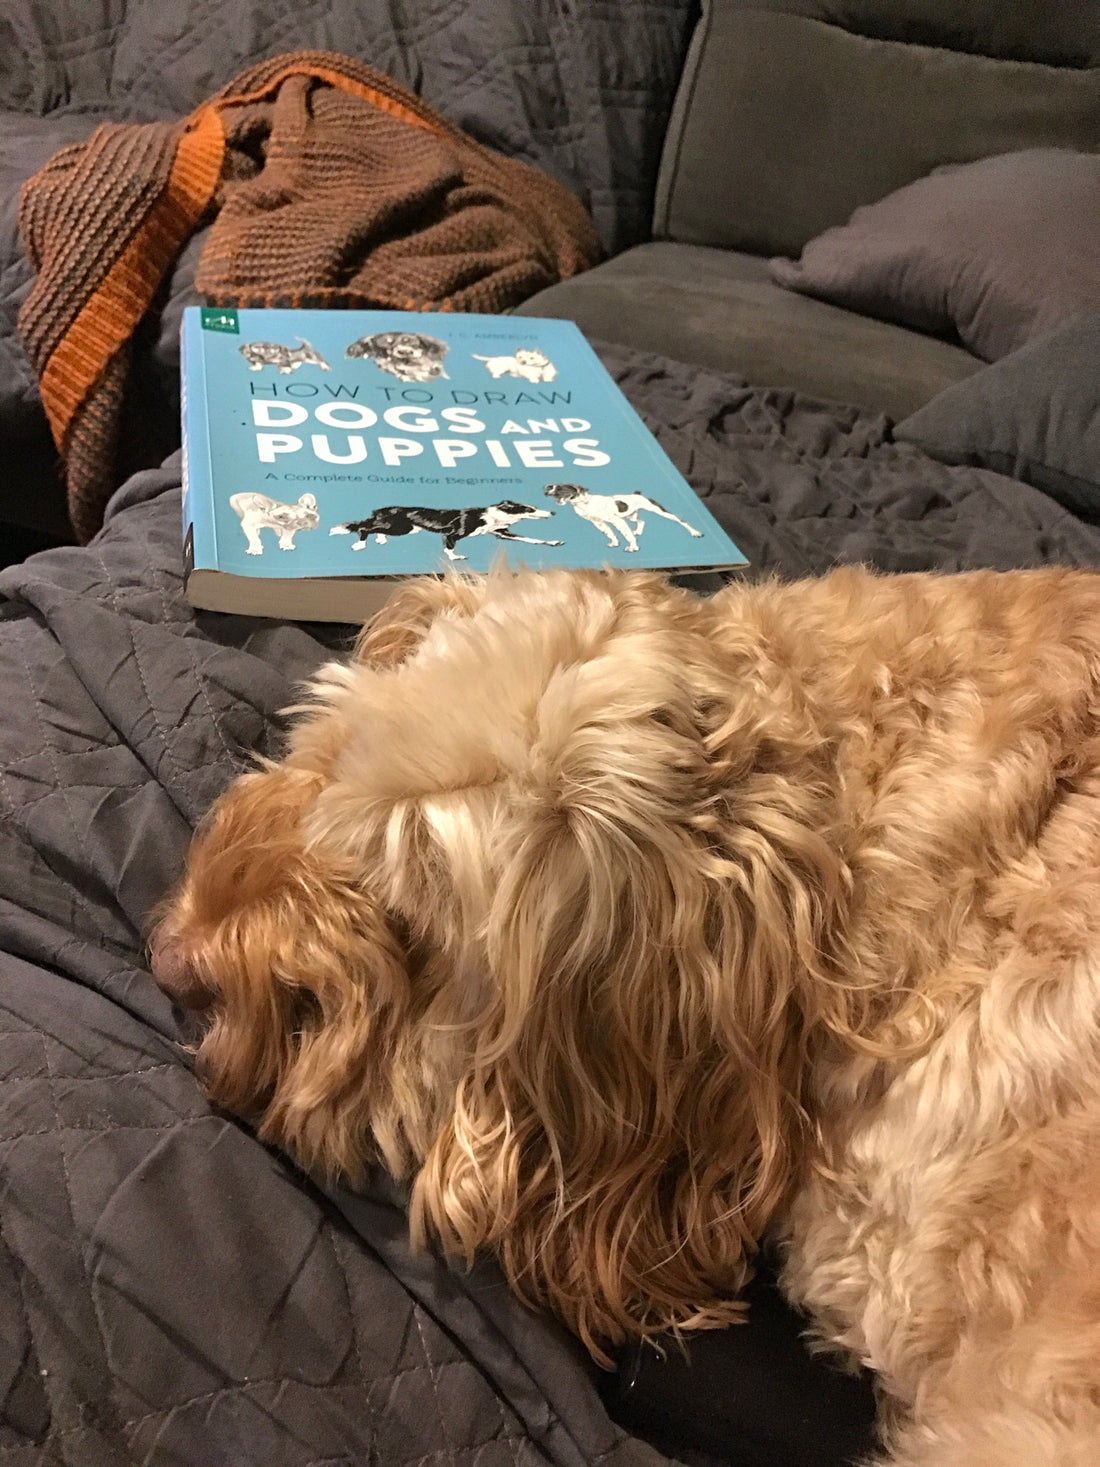 My dog Peaches snoozing next to the book